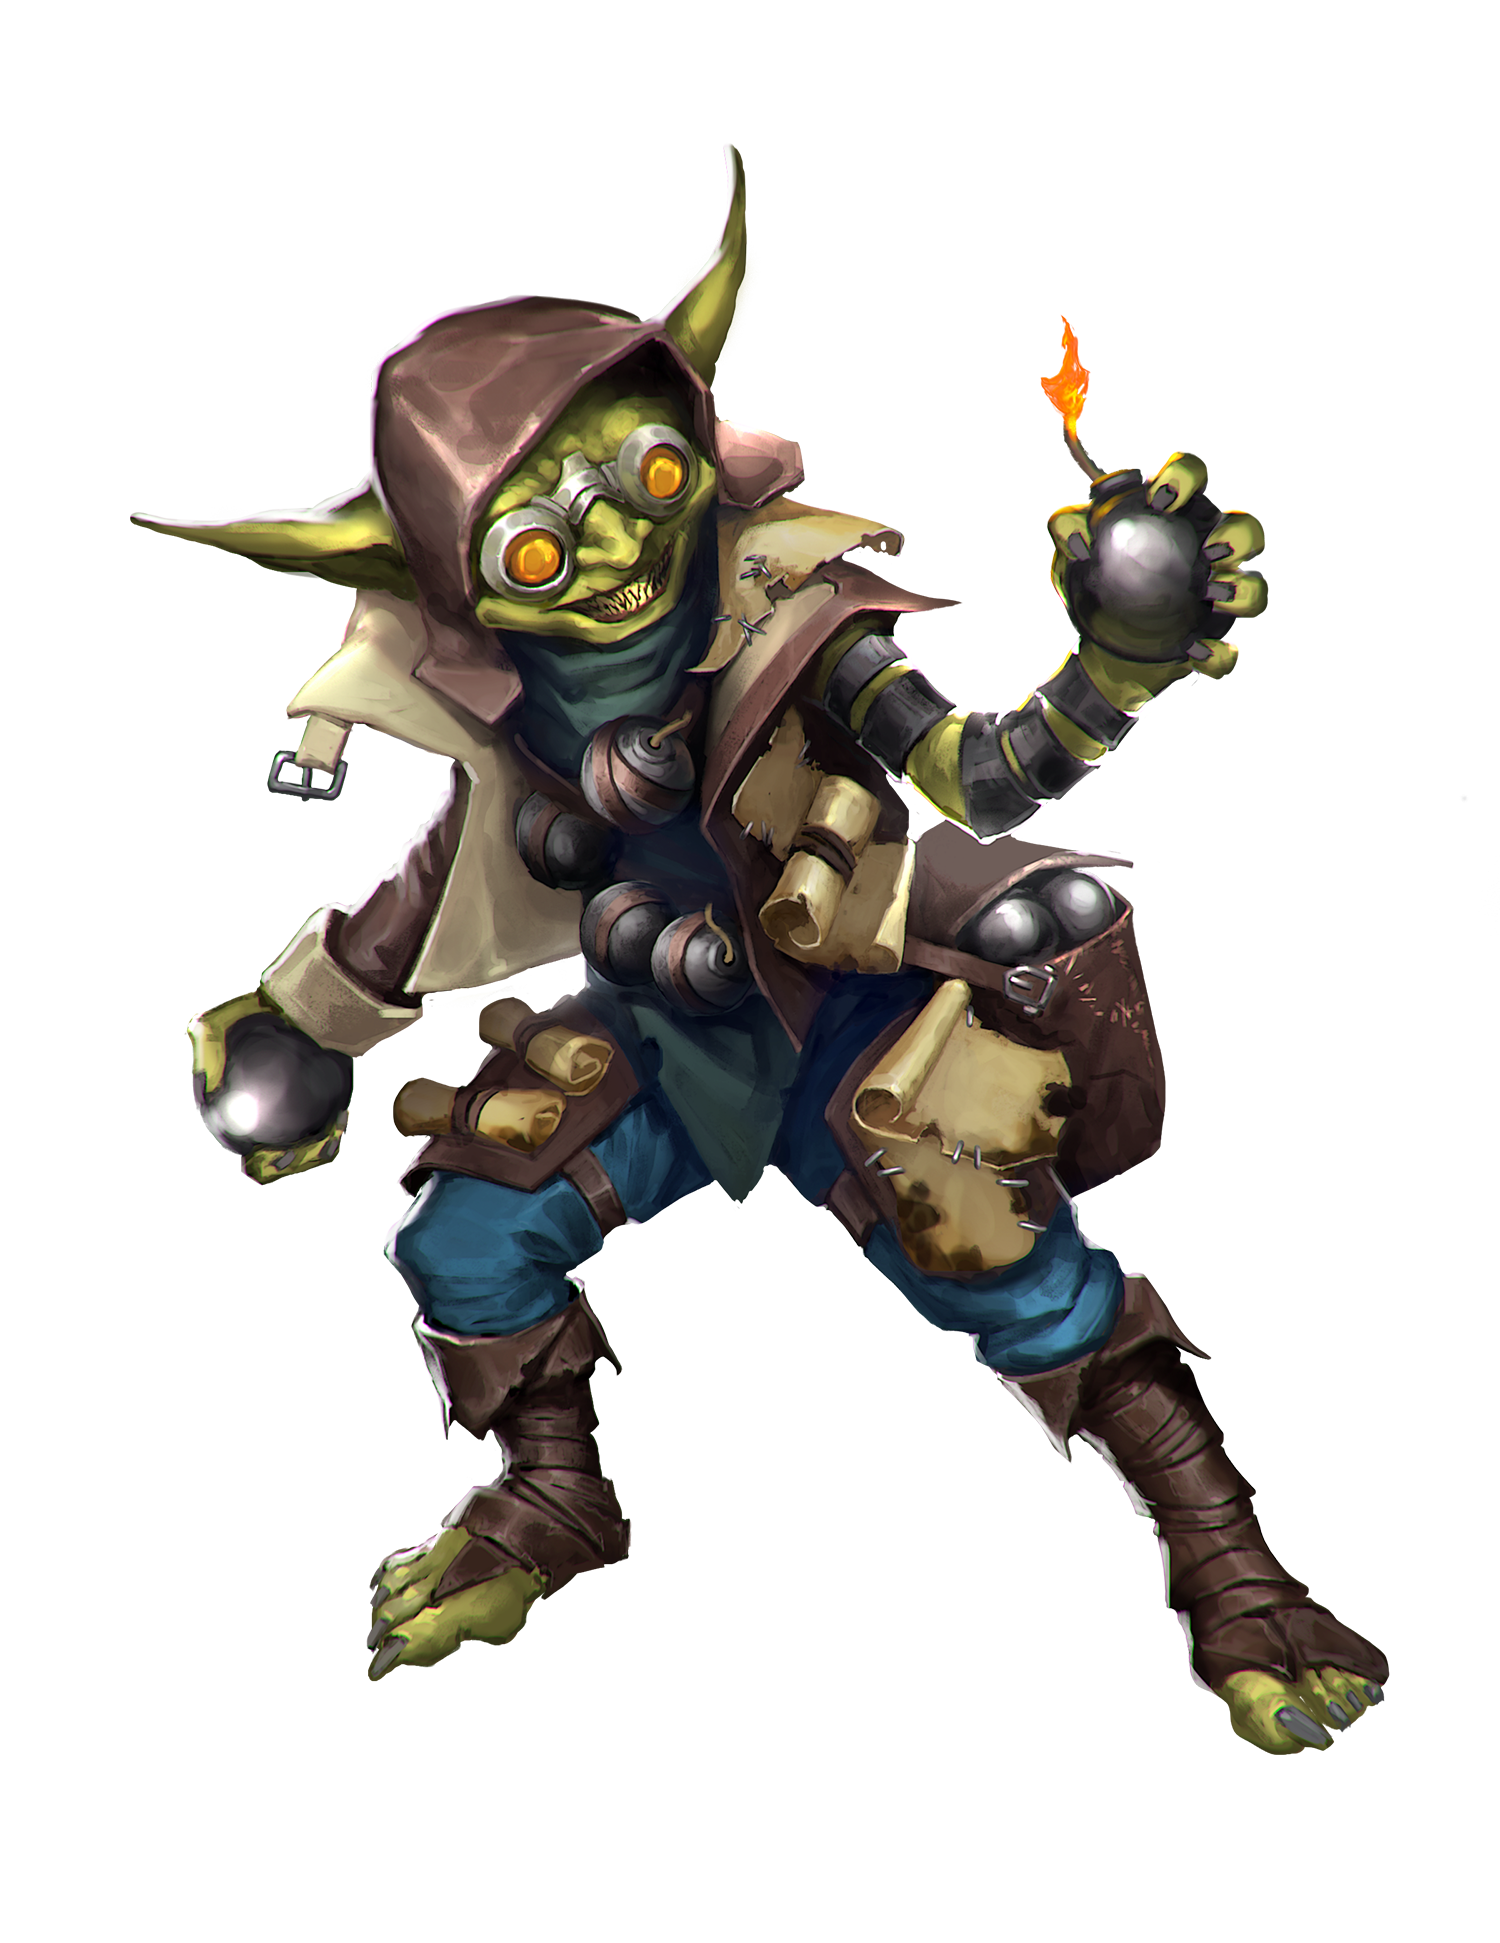 a goggle-wearing goblin has scraps of paper stuck to his leather armor, and wields a bomb with lit fuse in one hand